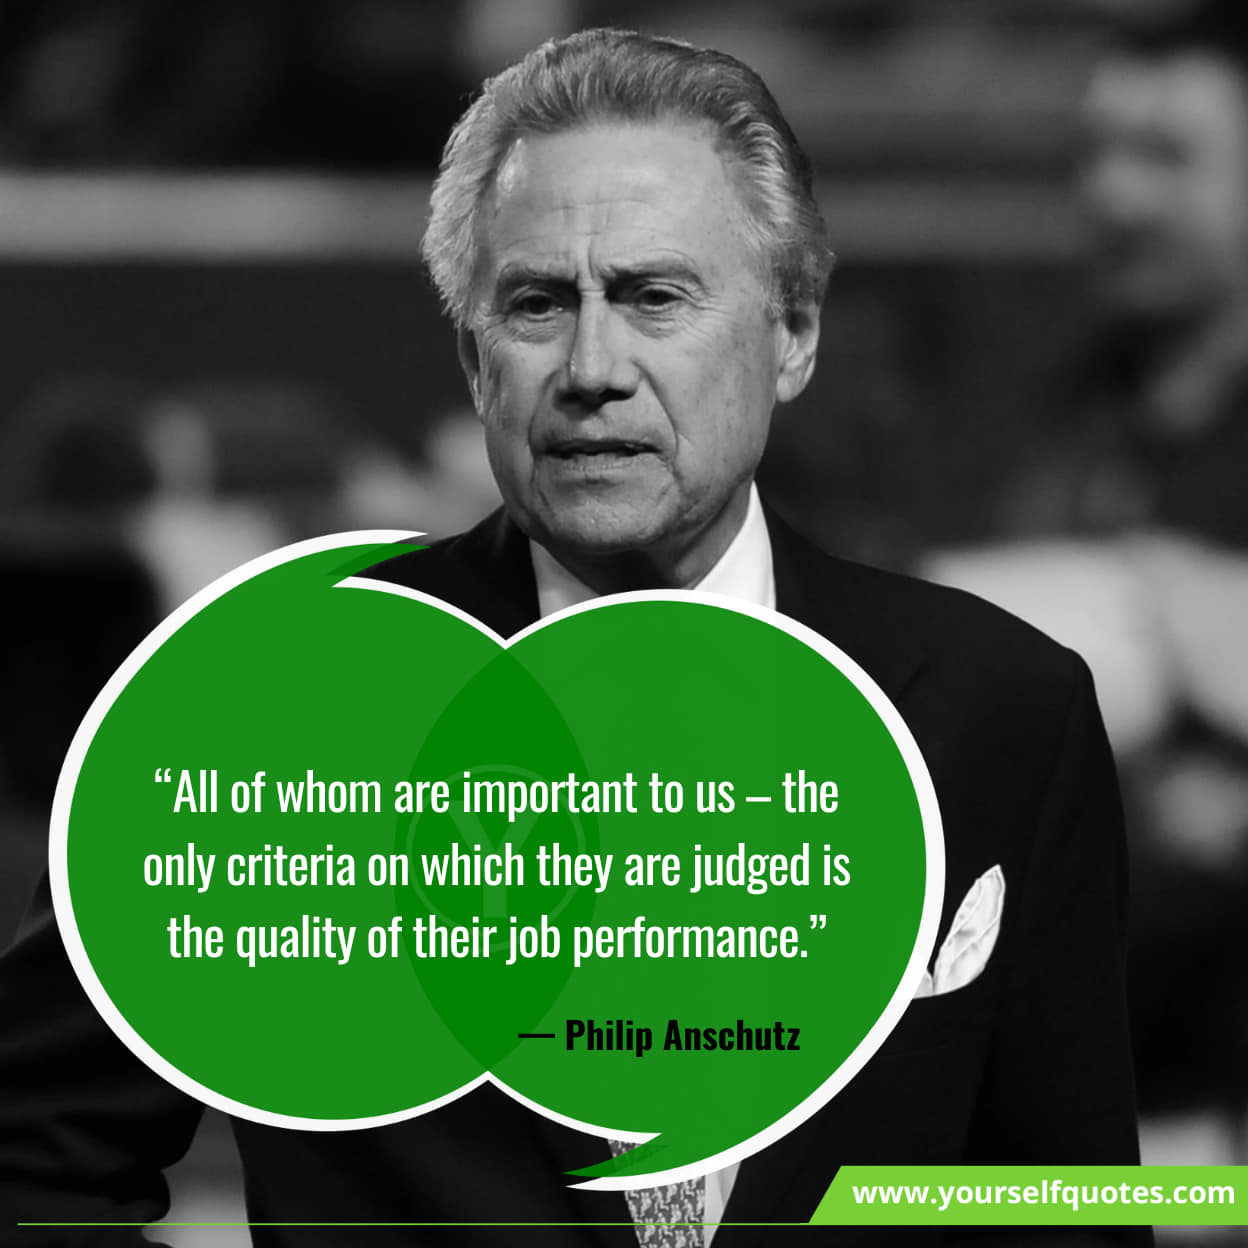 Philip Anschutz Quotes For Business